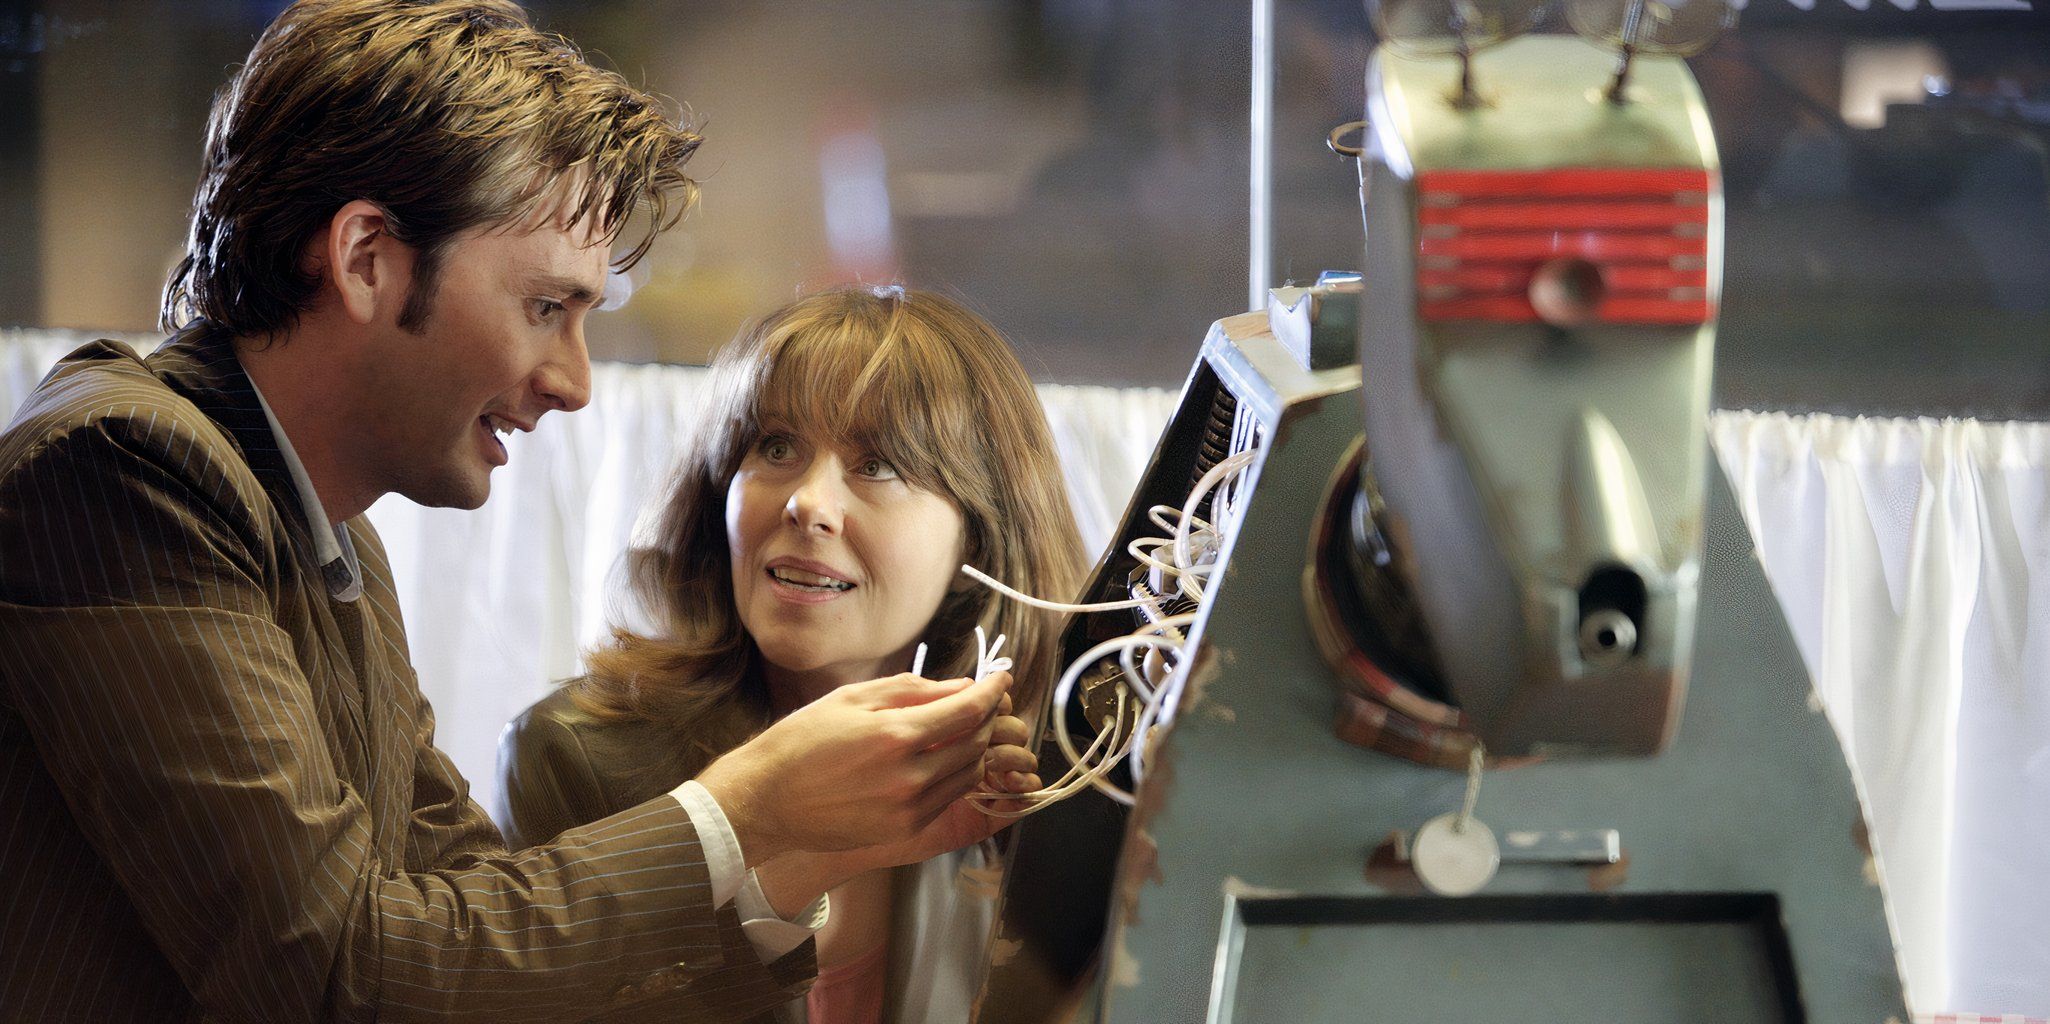 10th Doctor and Sarah Jane fixing K9 in 'School Reunion' from 'Doctor Who'